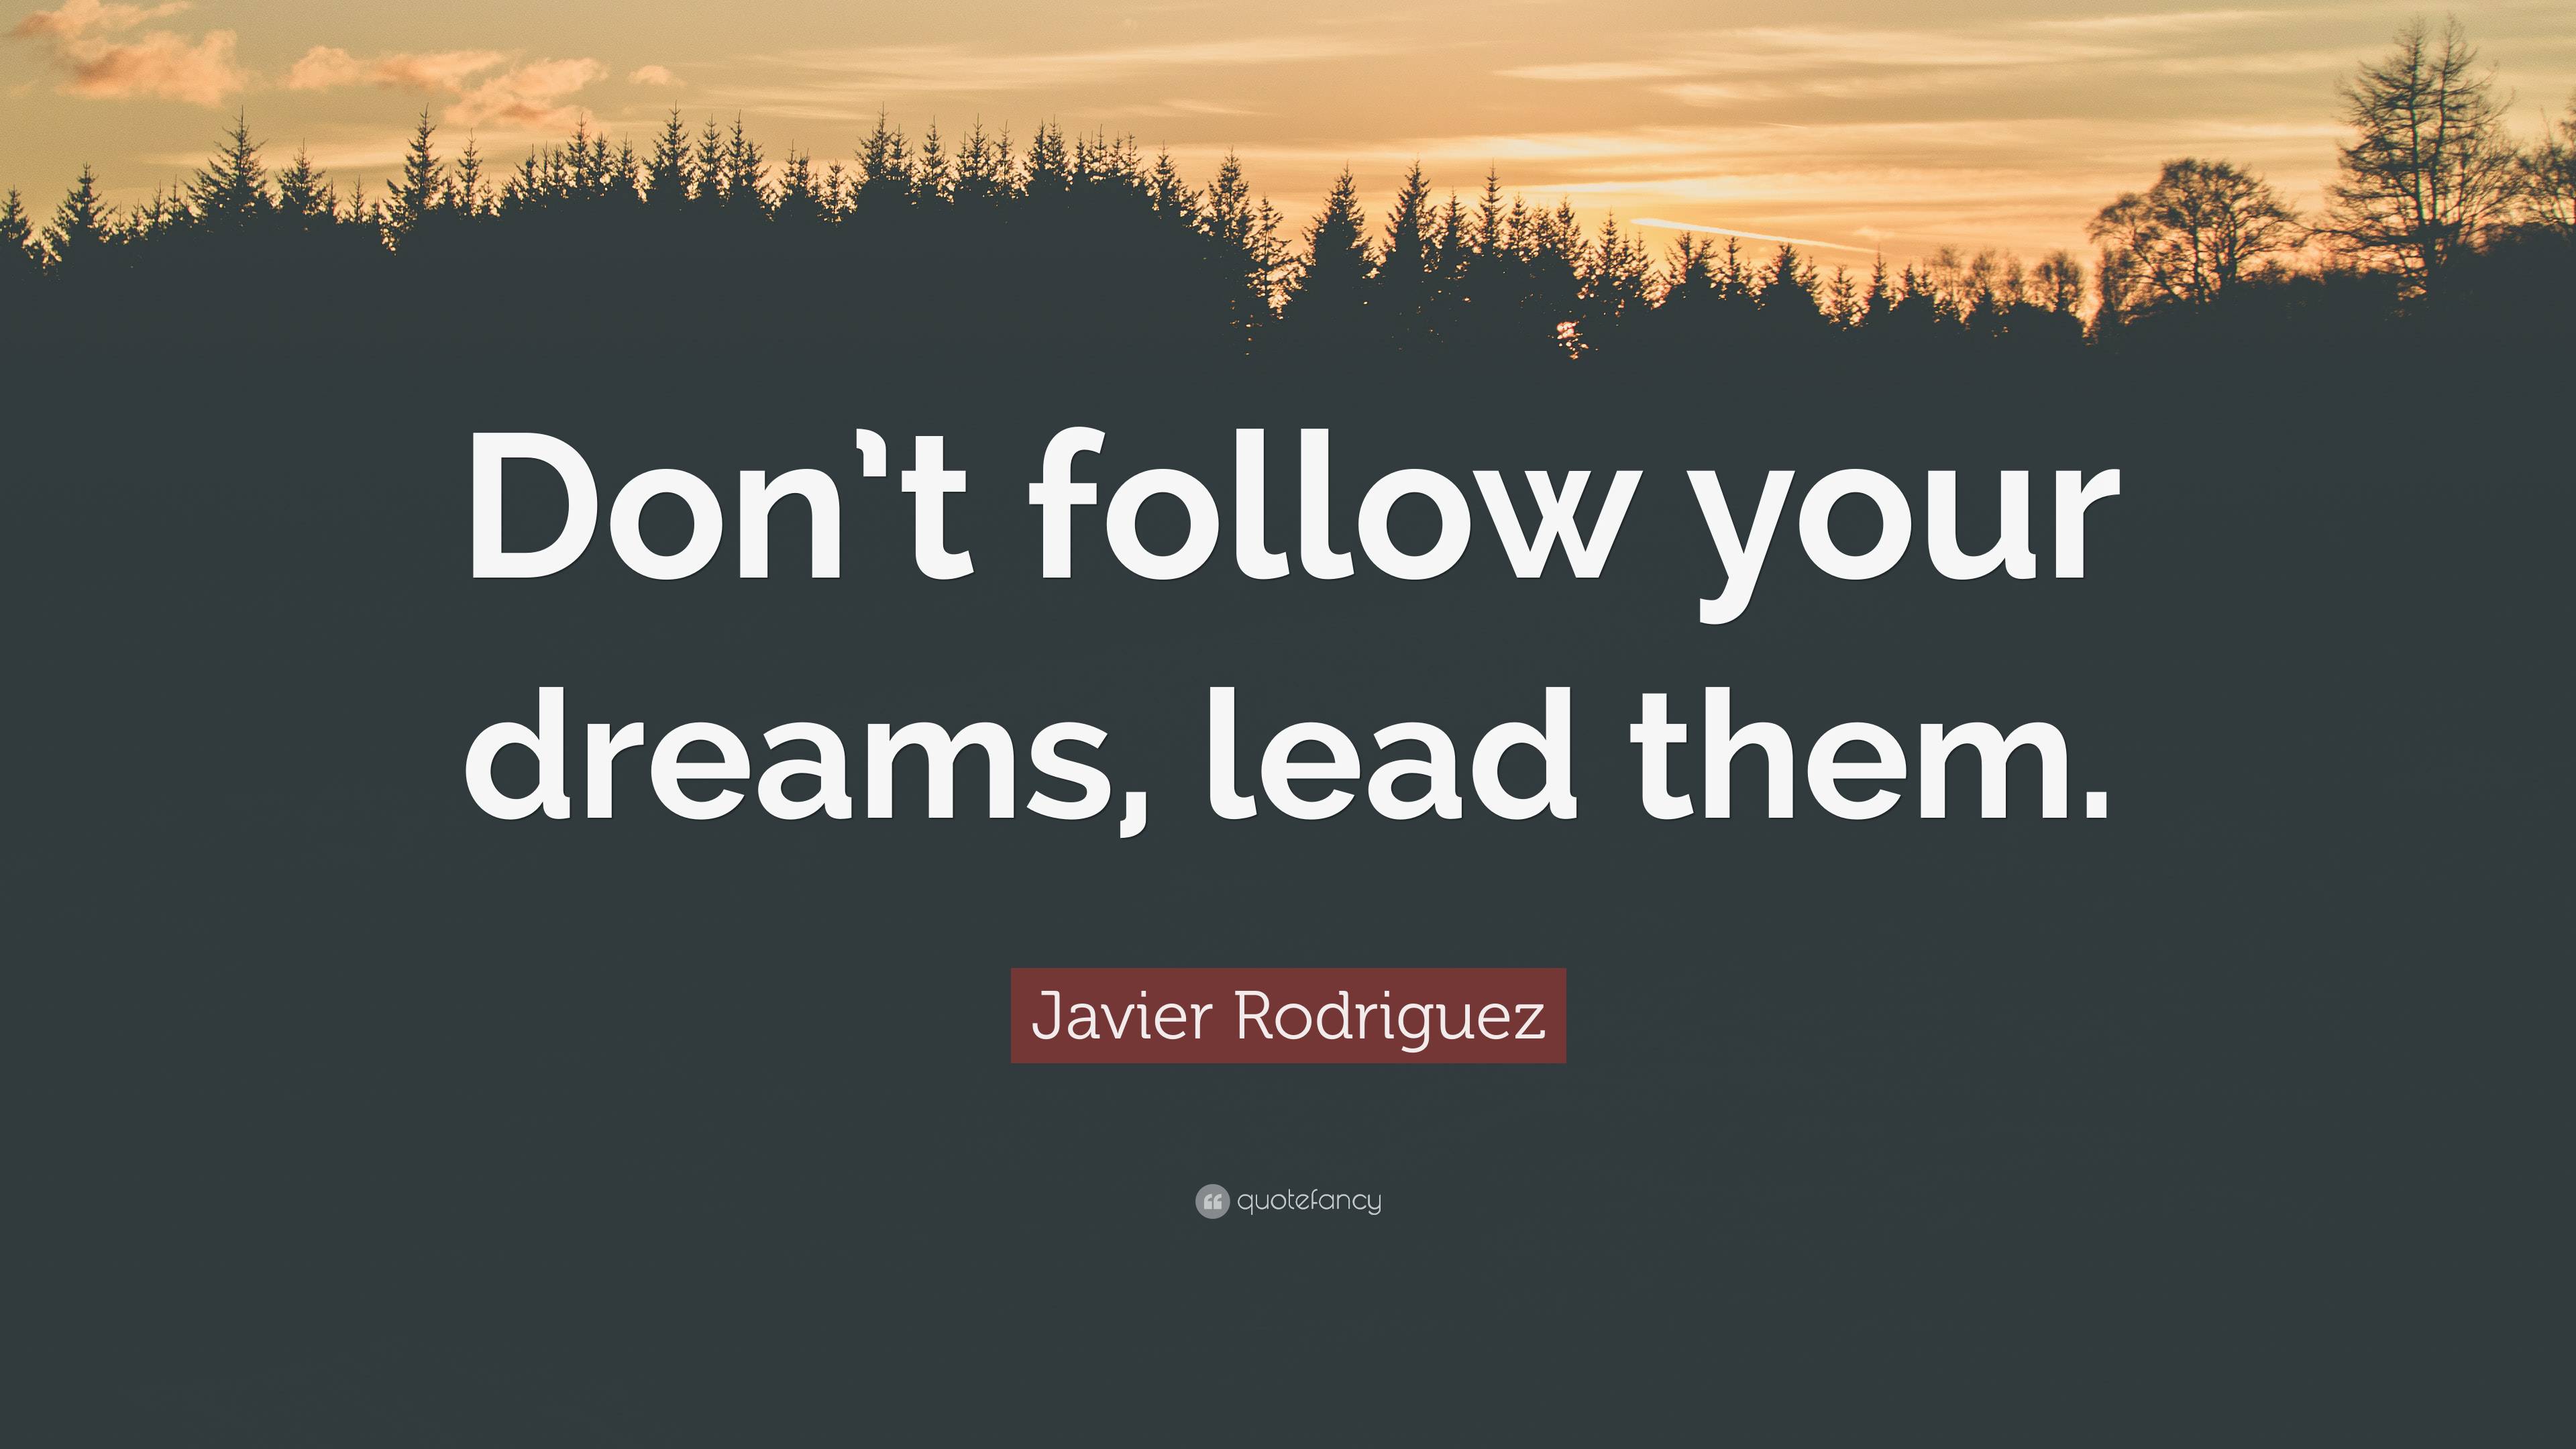 Javier Rodriguez Quote: “Don't follow your dreams, lead them.” (2 wallpaper)